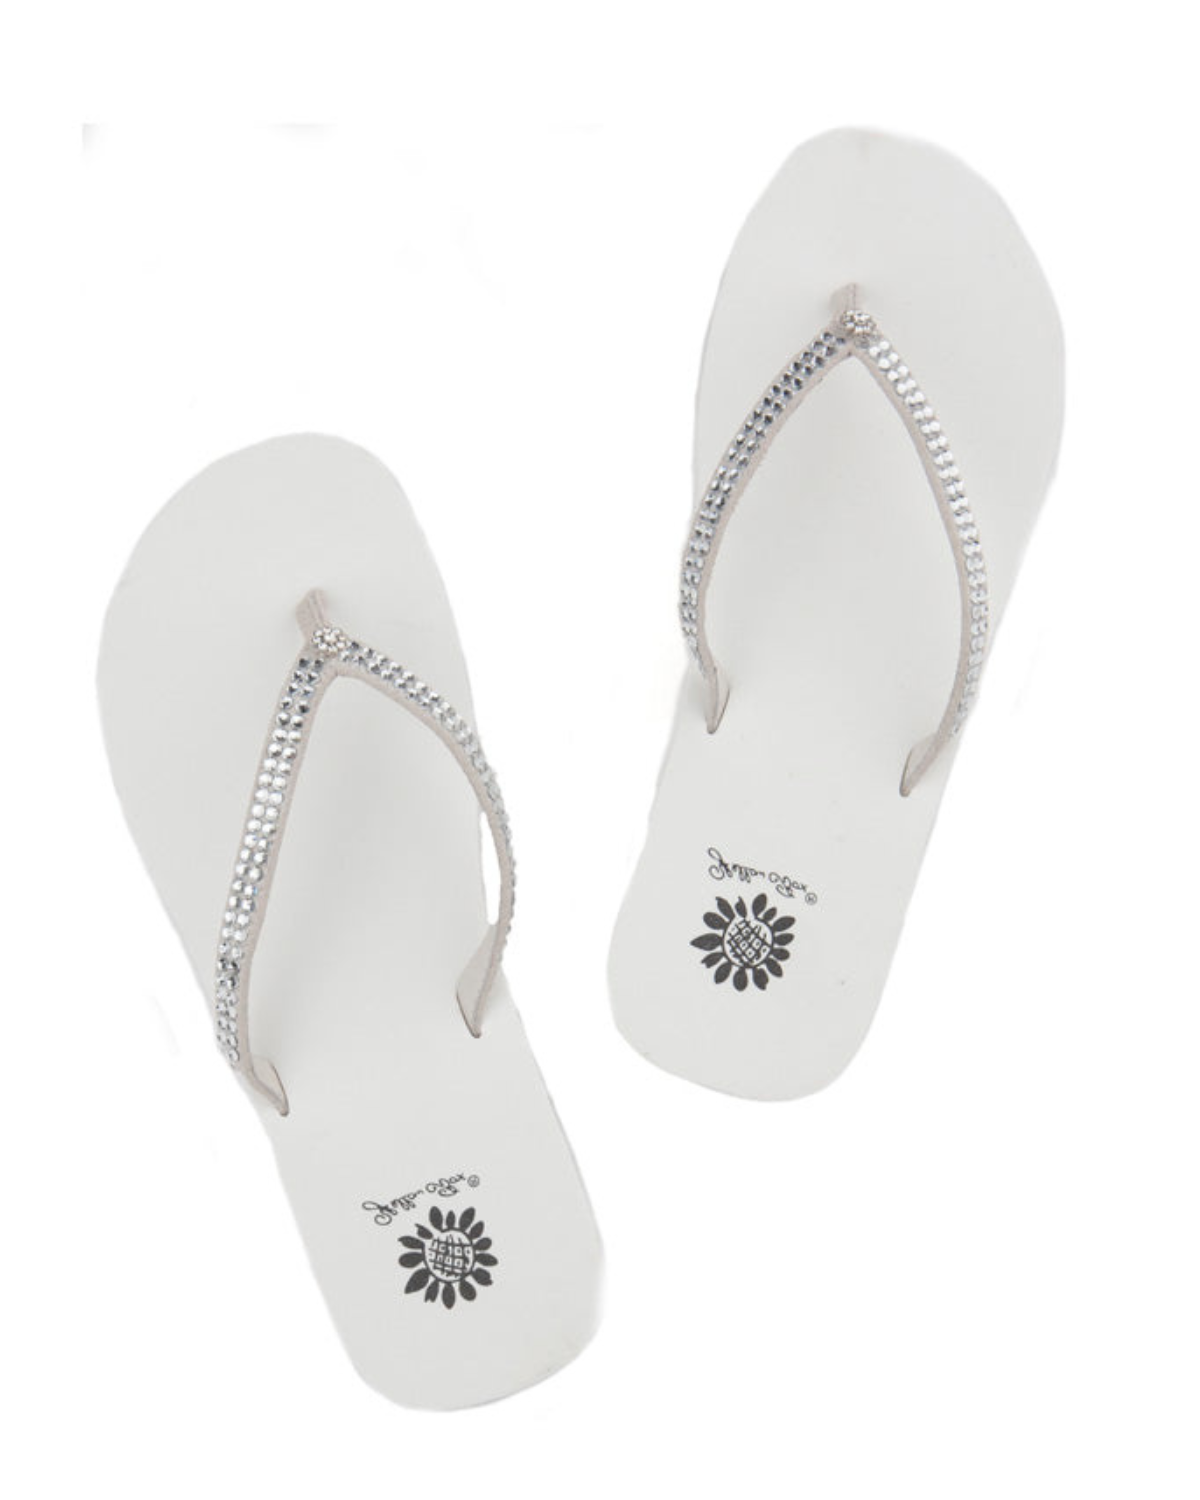 Women's white wedge sandal with rhinestones on the strap.